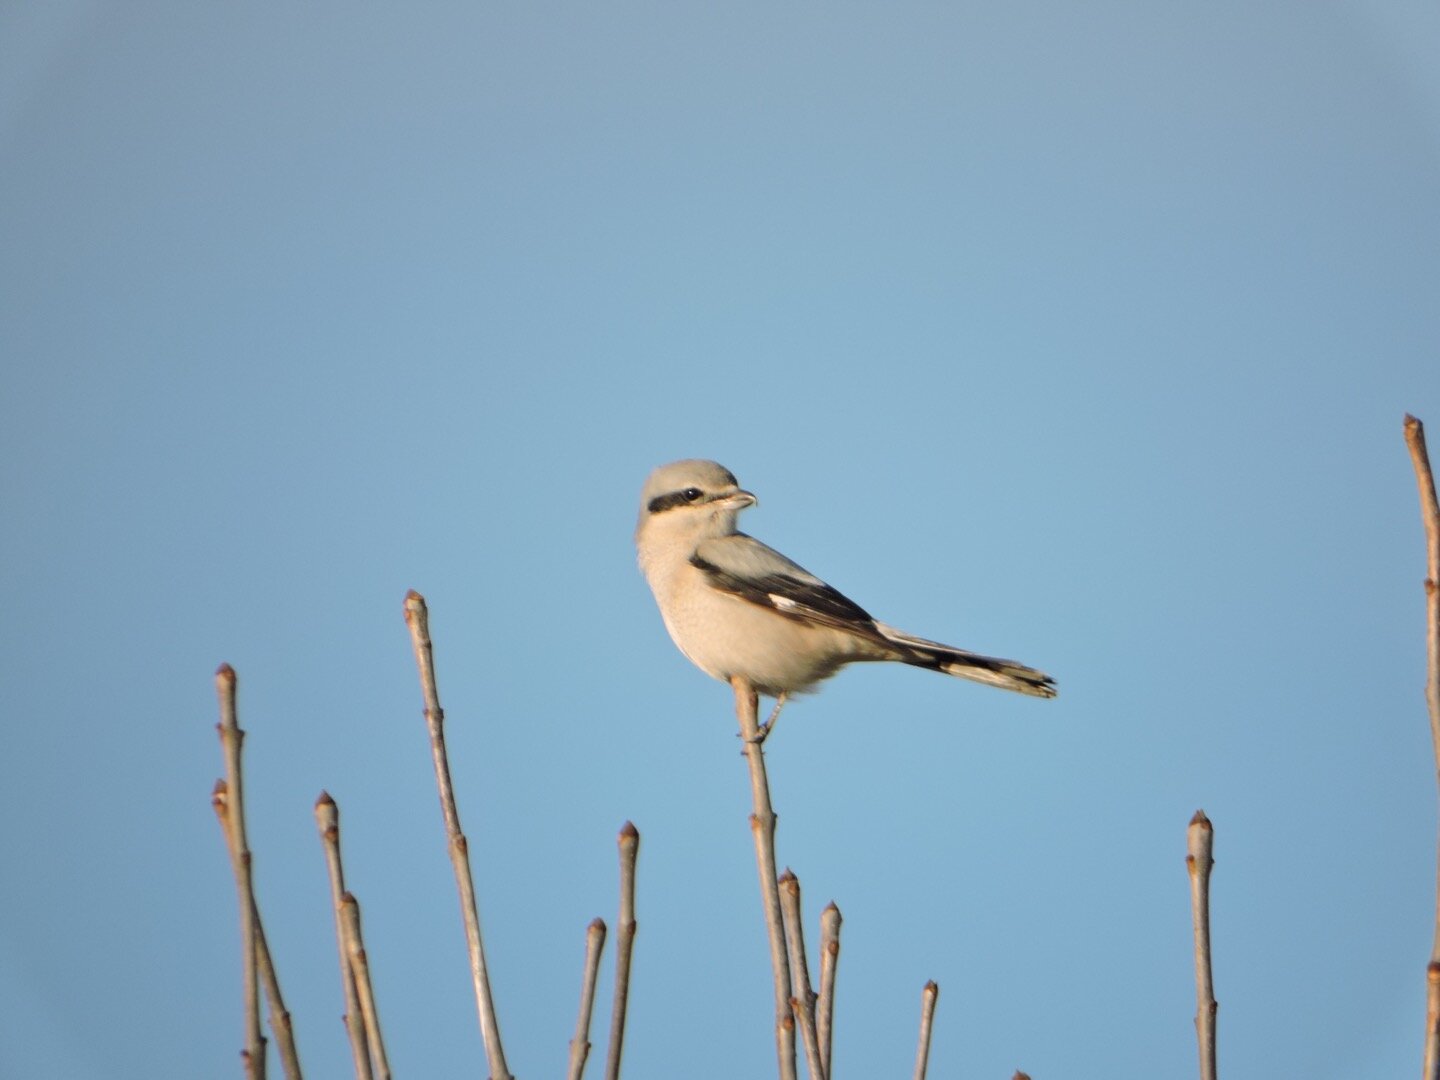 "Sully" the Northern Shrike